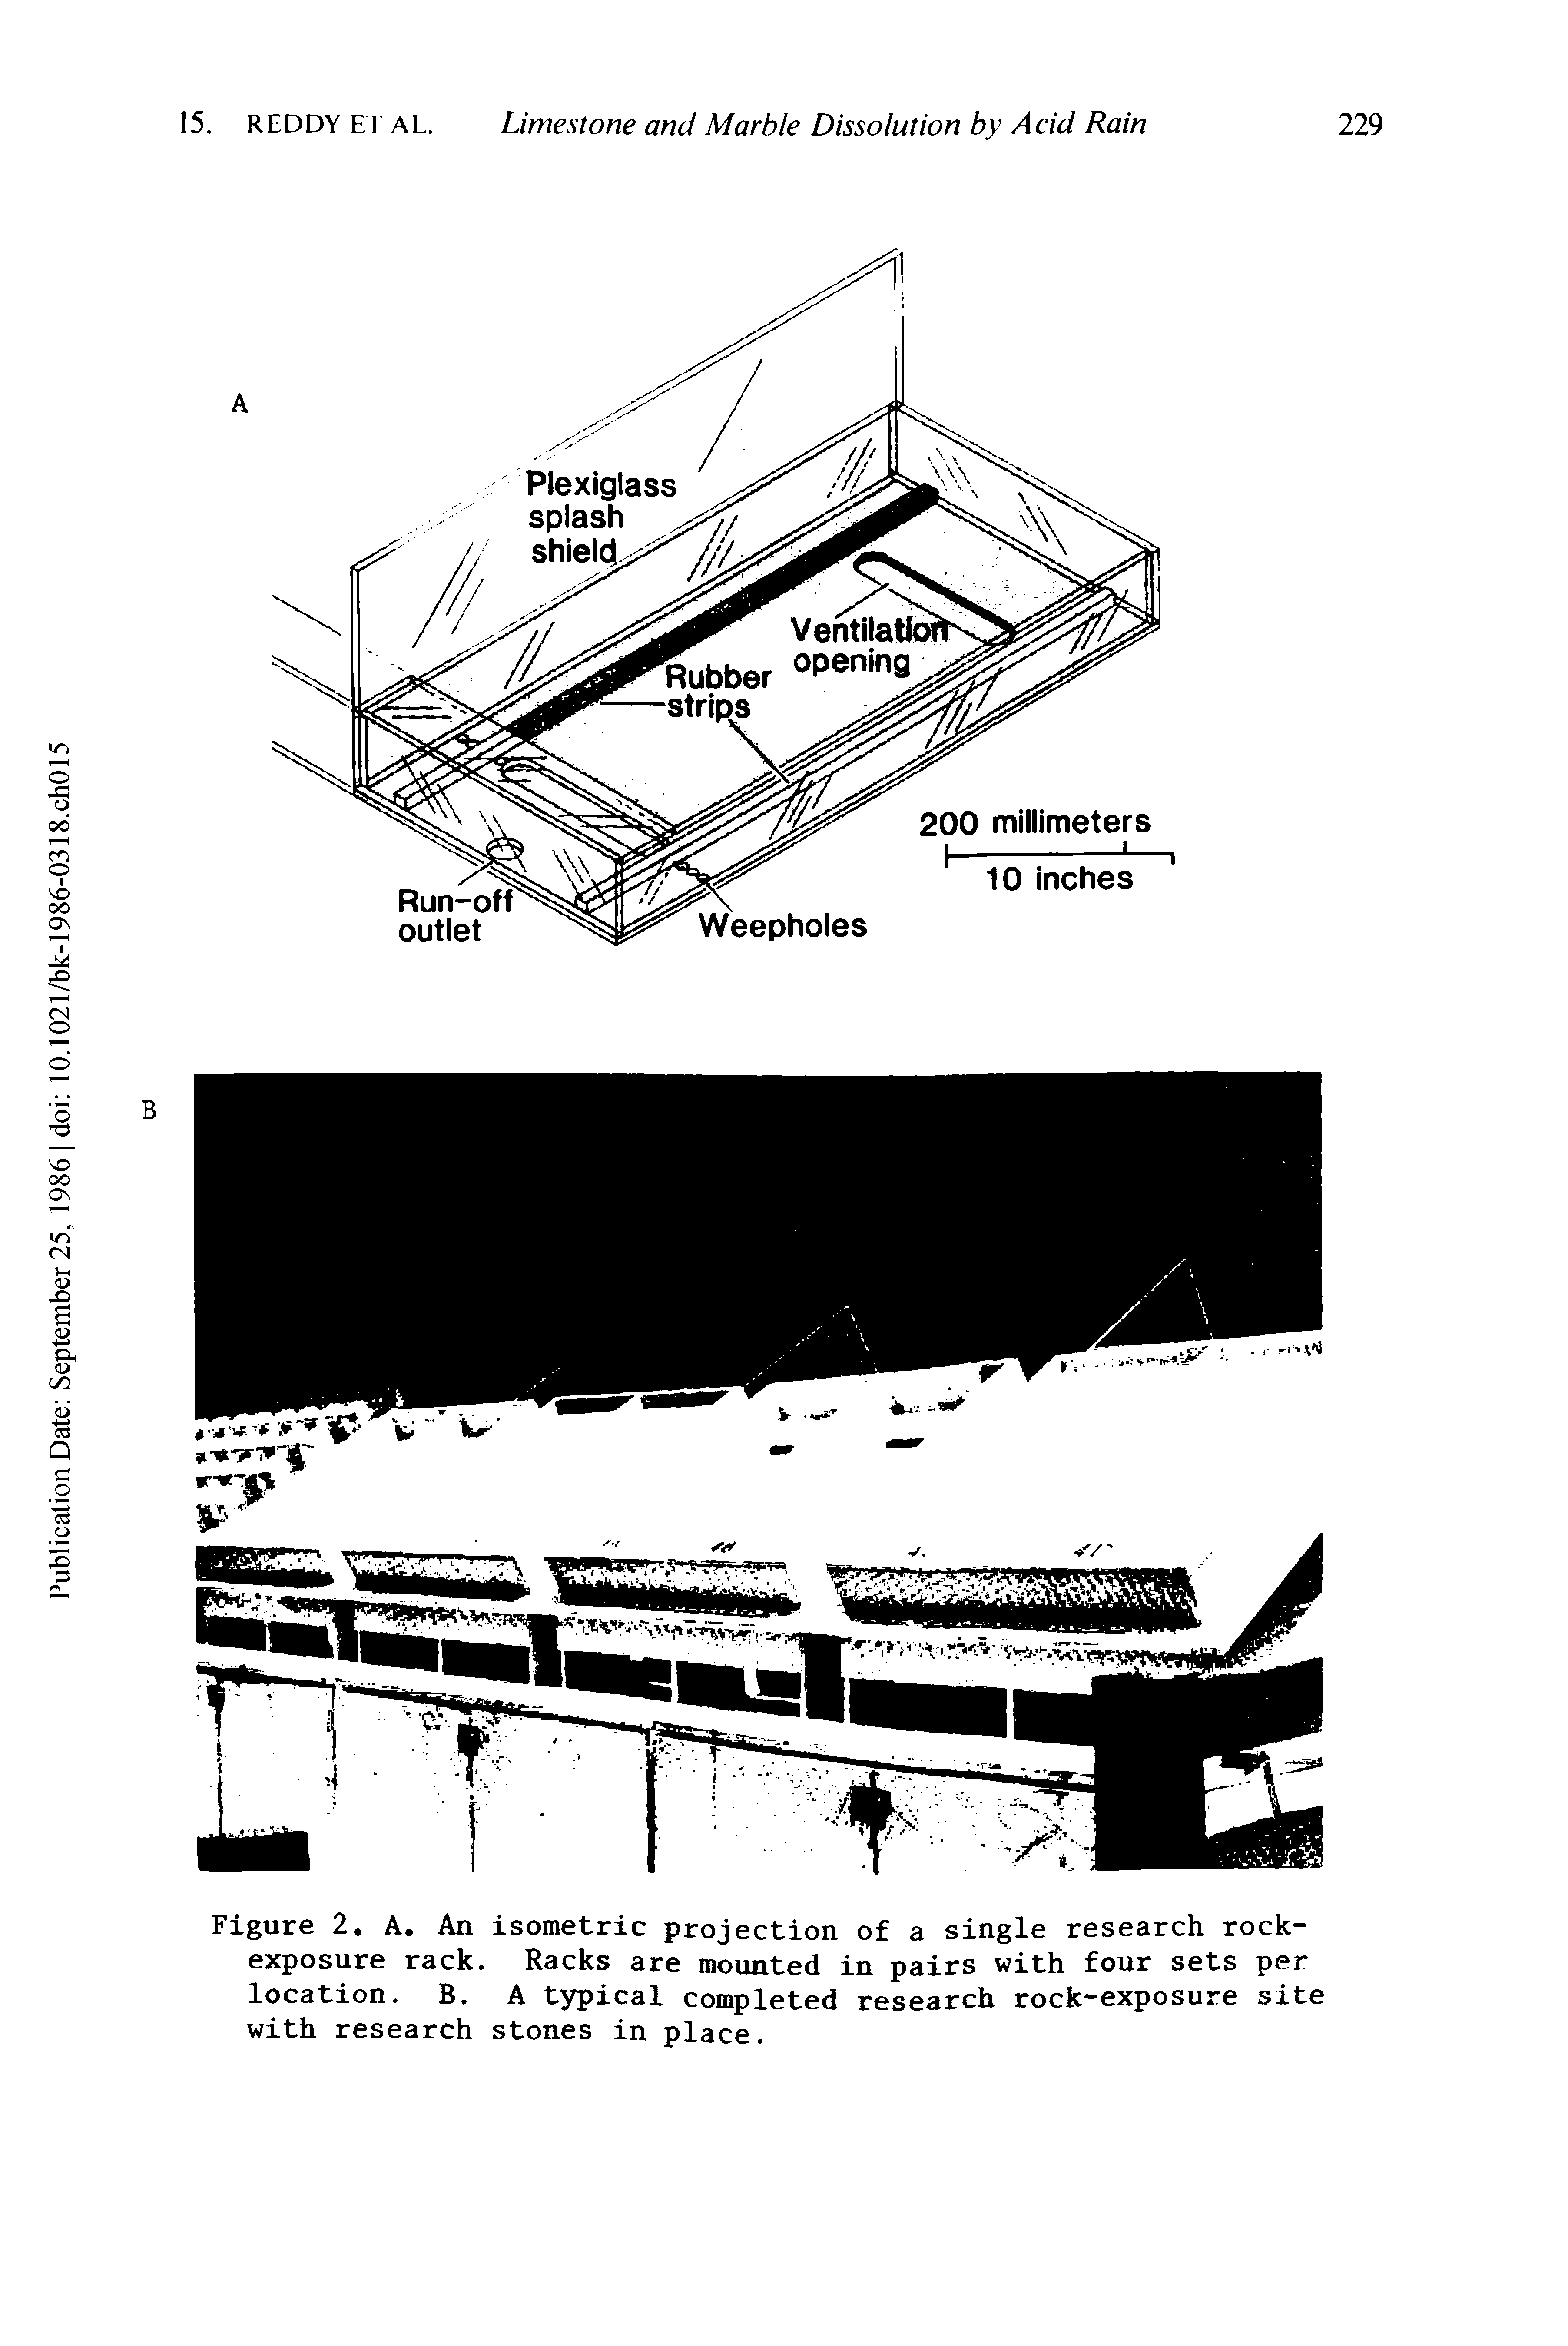 Figure 2. A, An isometric projection of a single research rock-exposure rack. Racks are mounted in pairs with four sets per location. B. A typical completed research rock-exposure site with research stones in place.